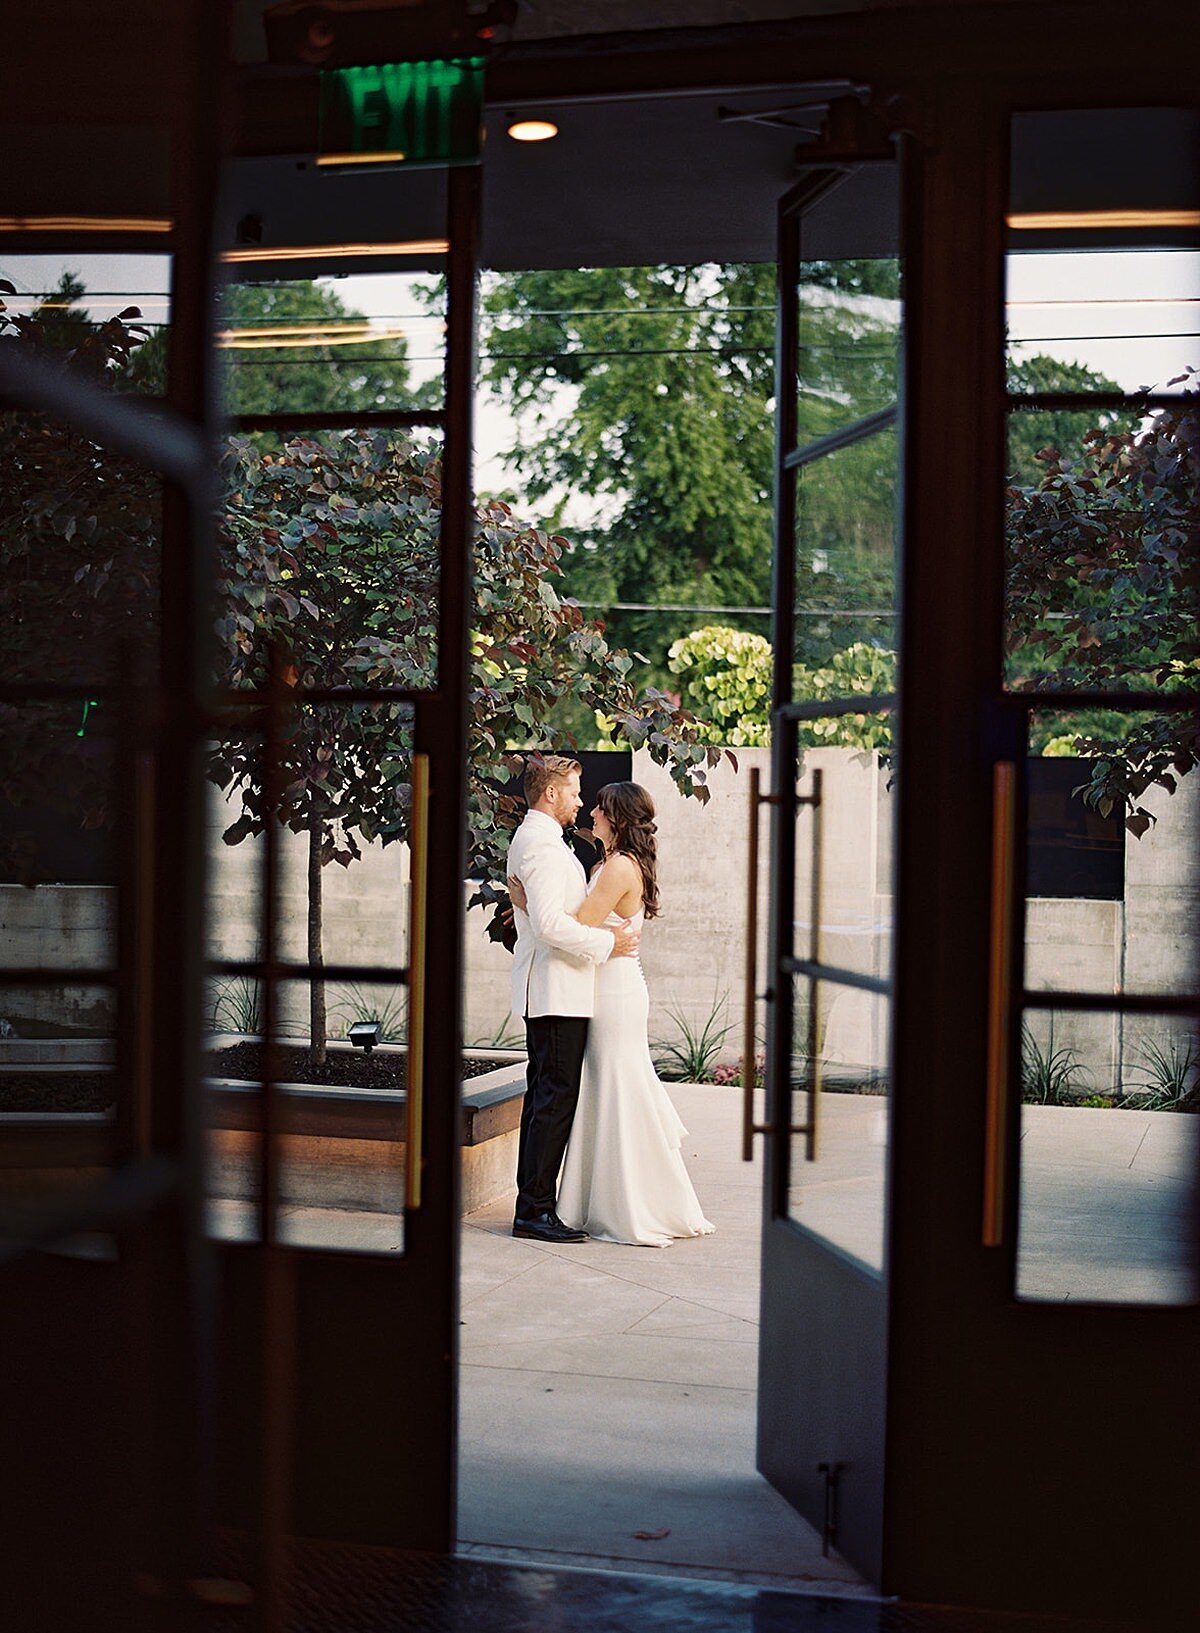 The groom, wearing a tuxedo with a white jacket and the bride wearing a white silk halter top sheath dress embrace in the courtyard of Clementine Hall during their summer wedding as we  look at them through the tall glass doors of the venue.